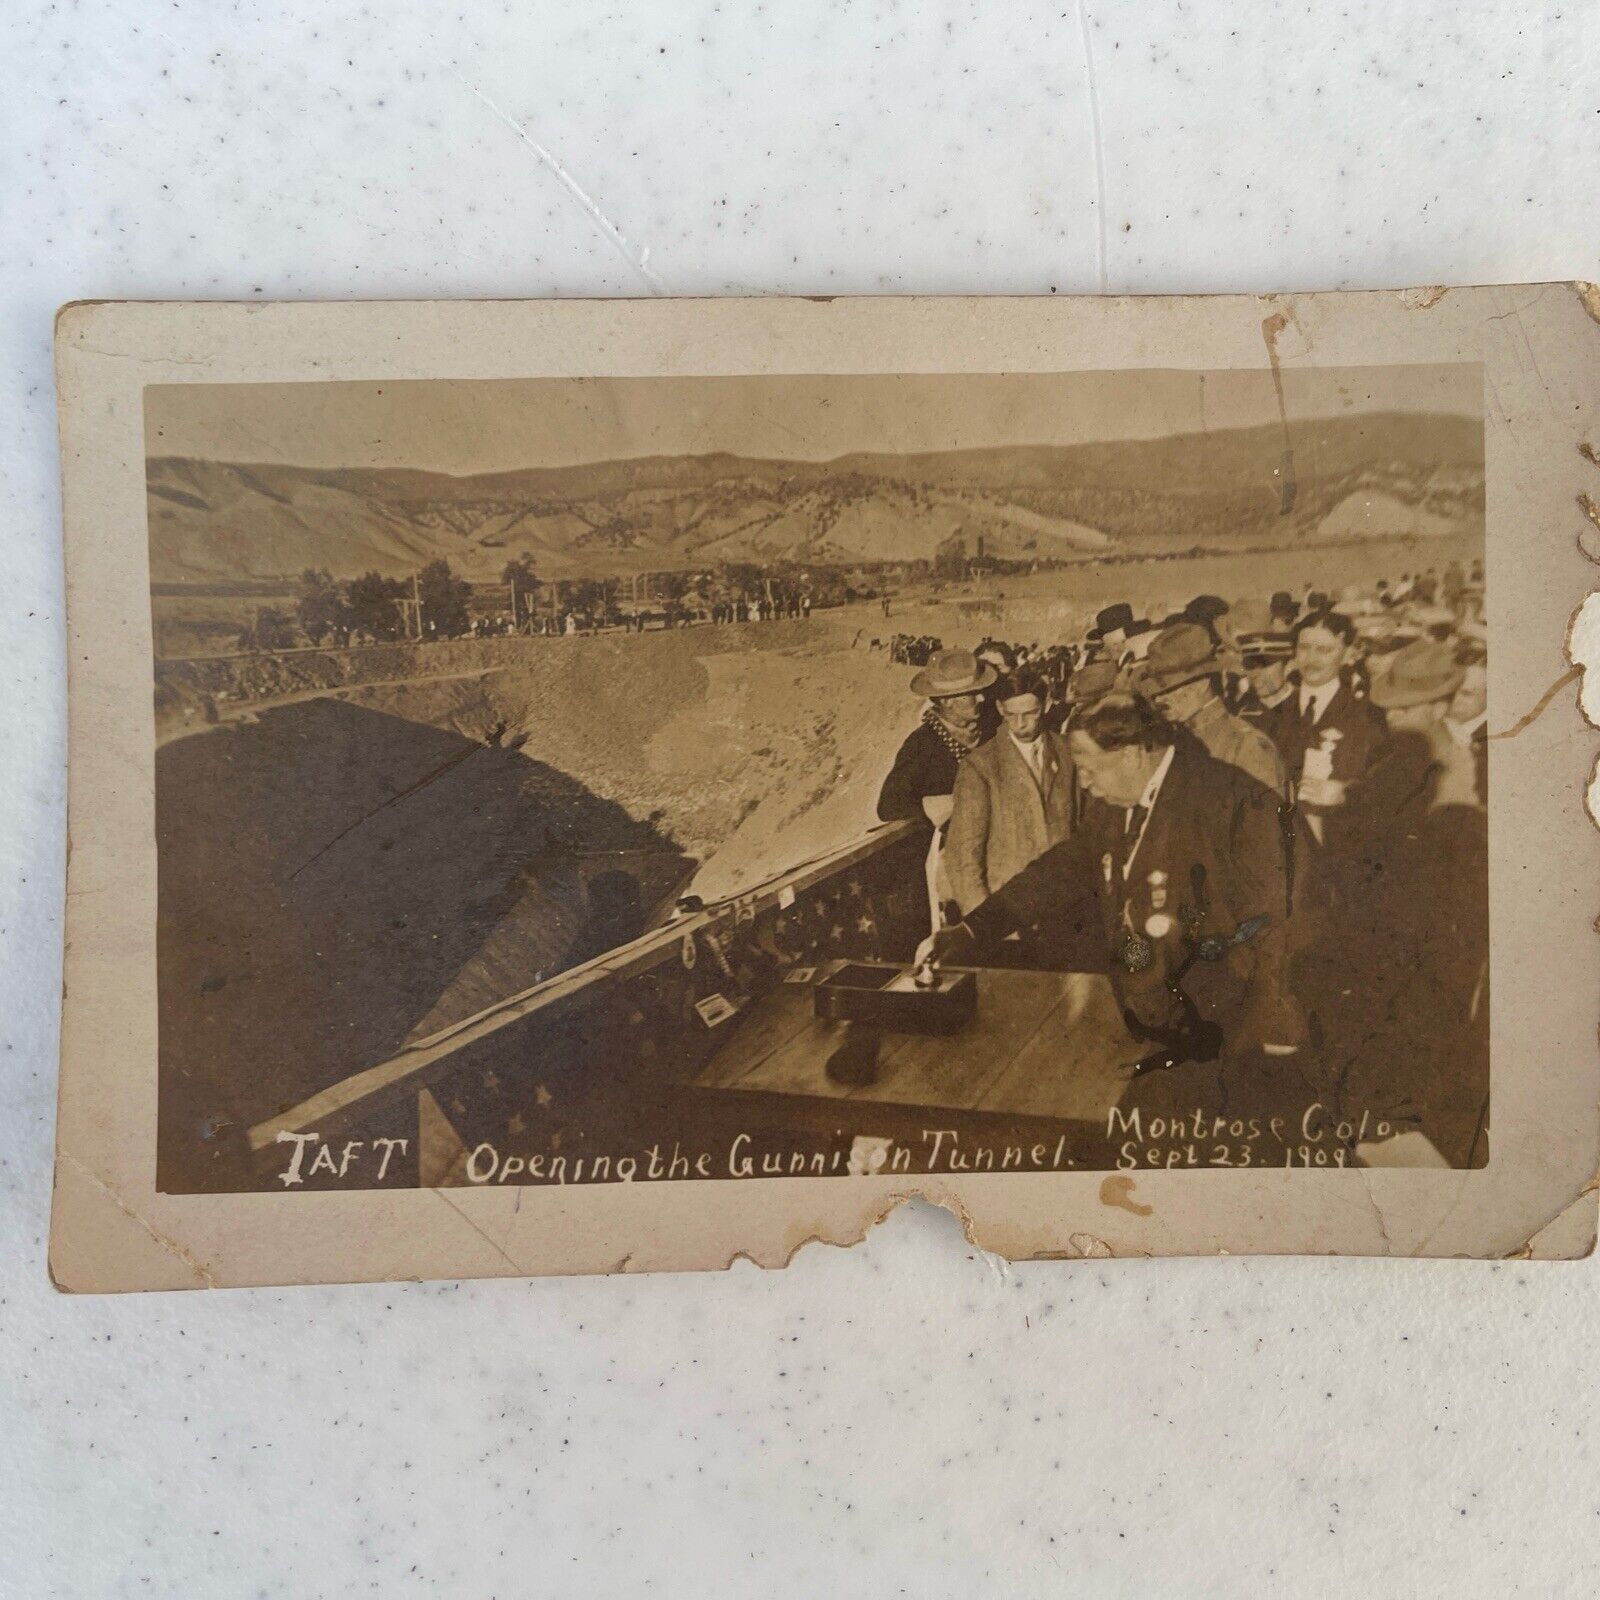 1909 Real Photo Postcard Of President Taft Opening The Gunnison Tunnel in Colo.